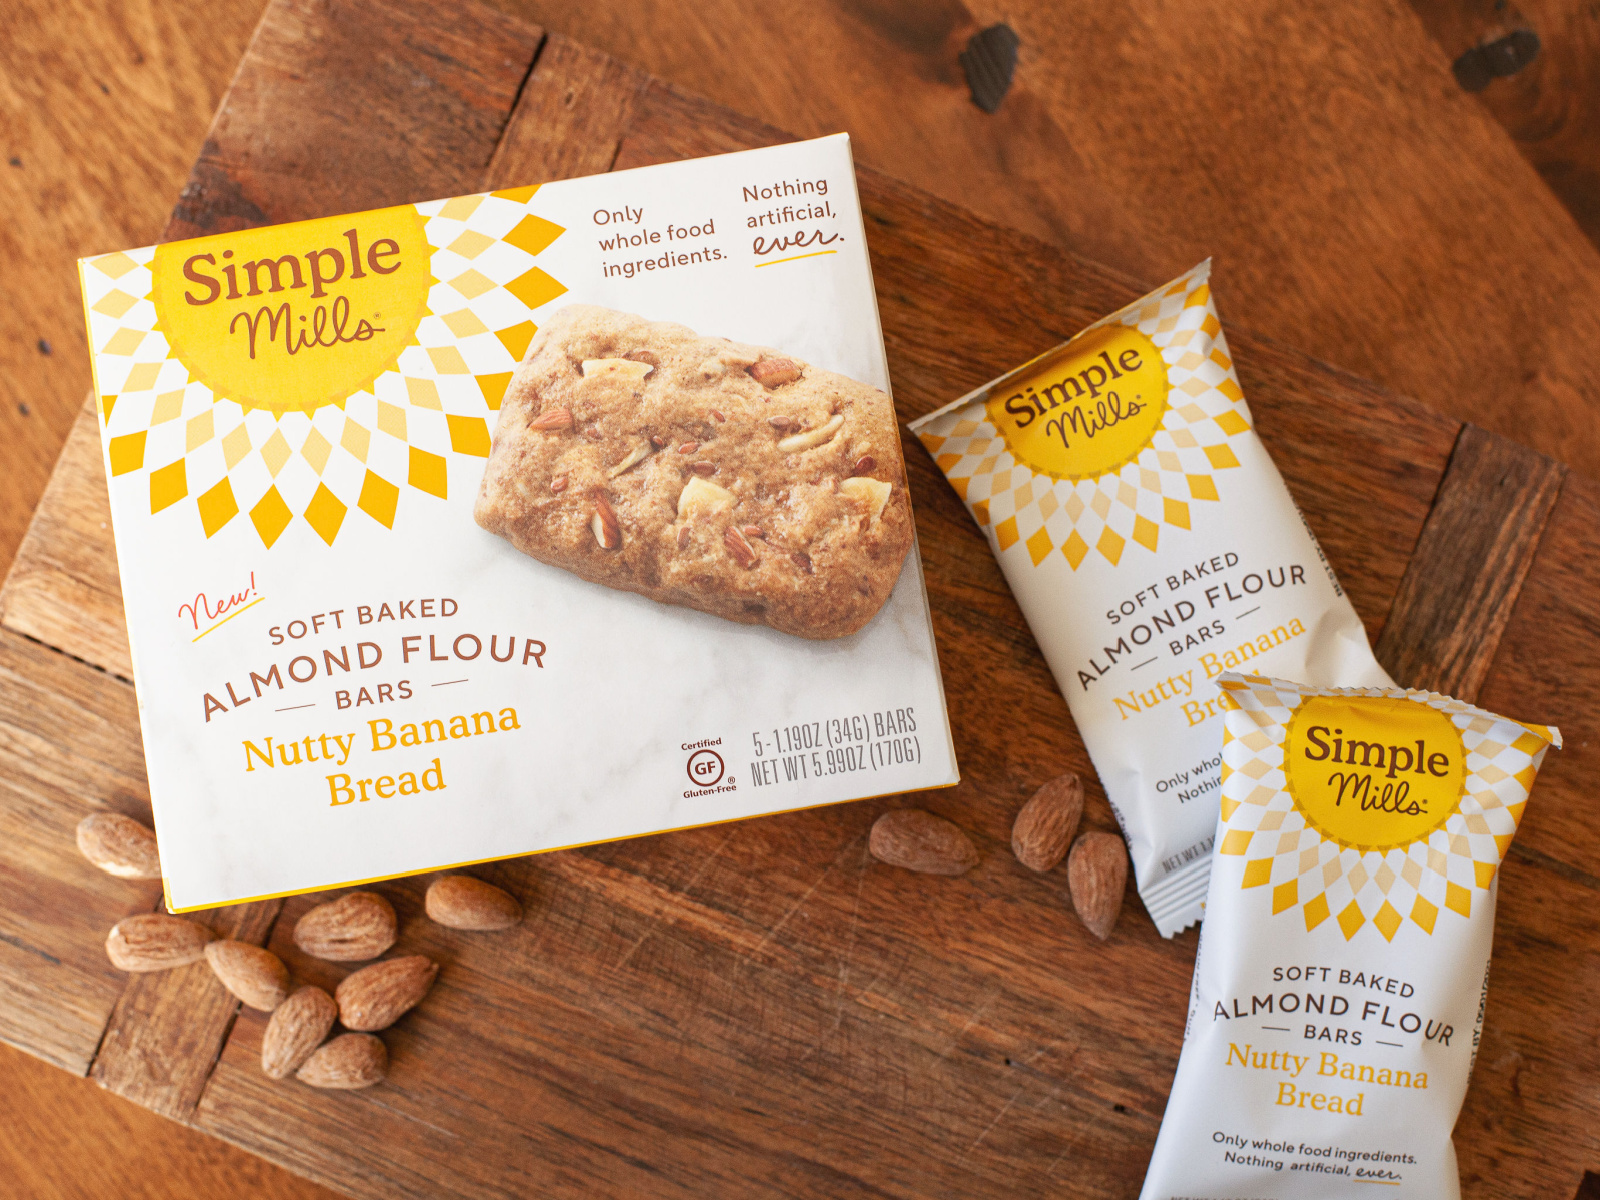 Simple Mills Soft Baked Bars Just $2.49 At Publix – Plus Cheap Cookies & Crackers